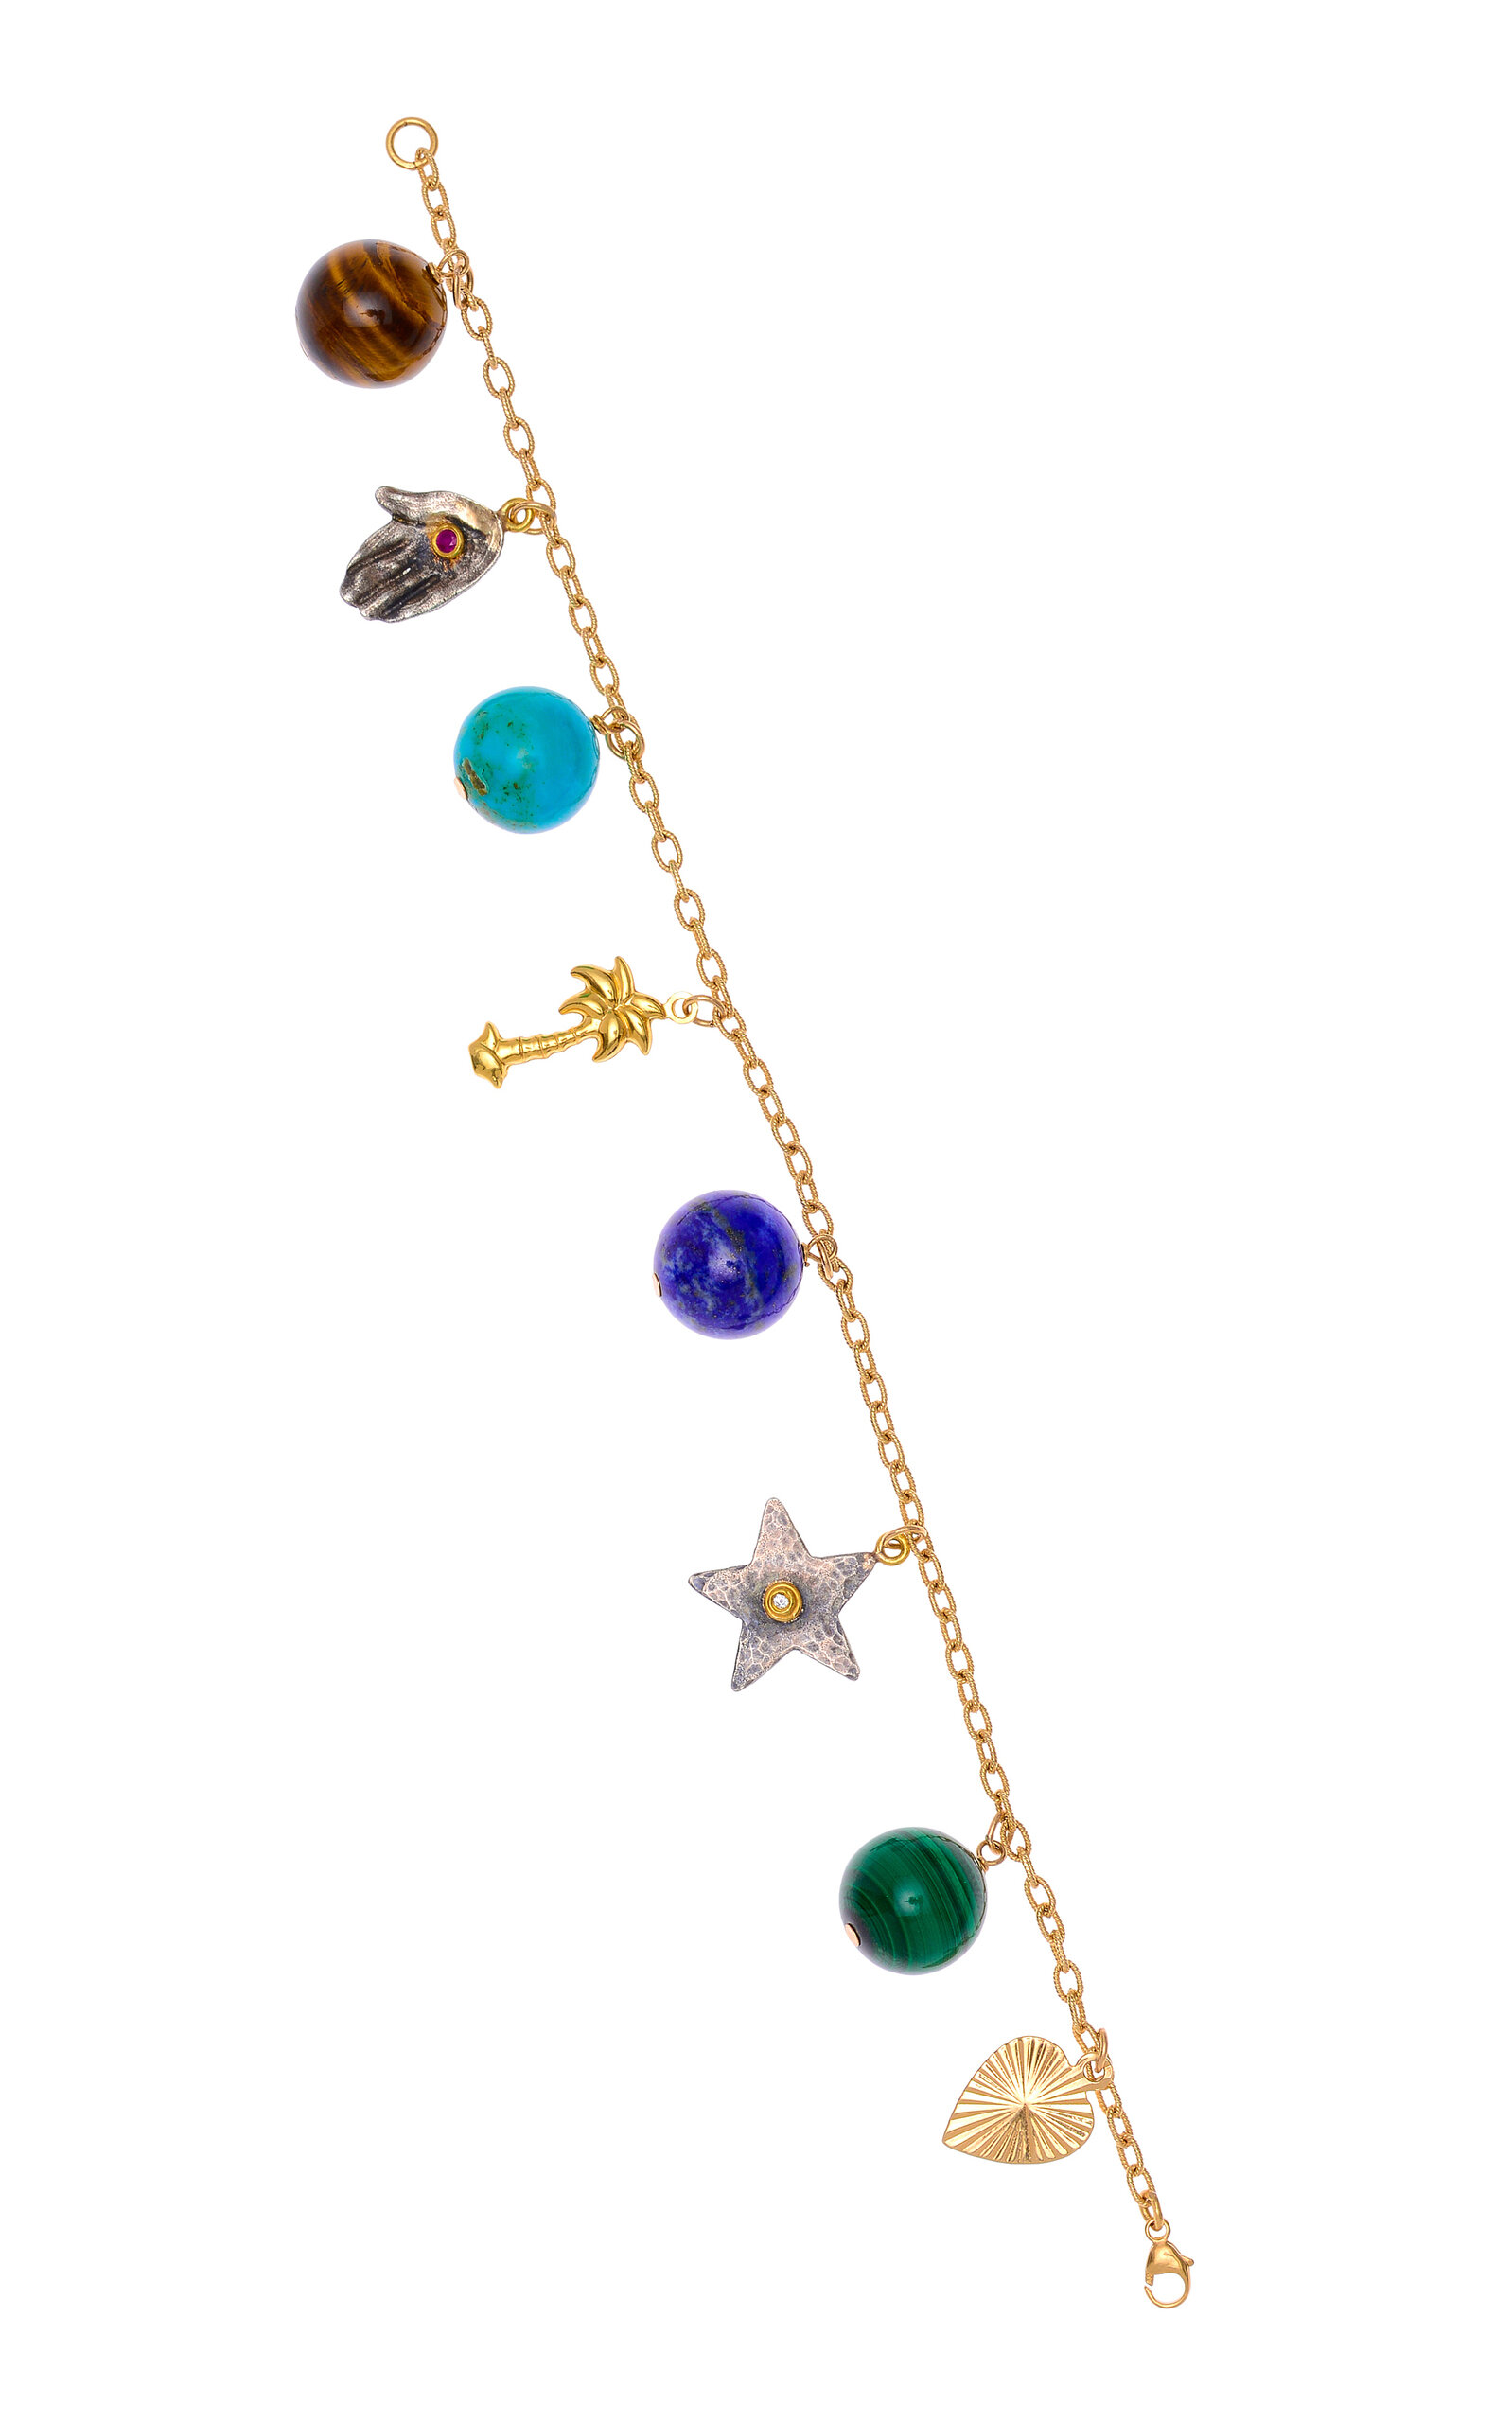 14K Yellow Gold and Sterling Silver Multi-Stone Charm Bracelet